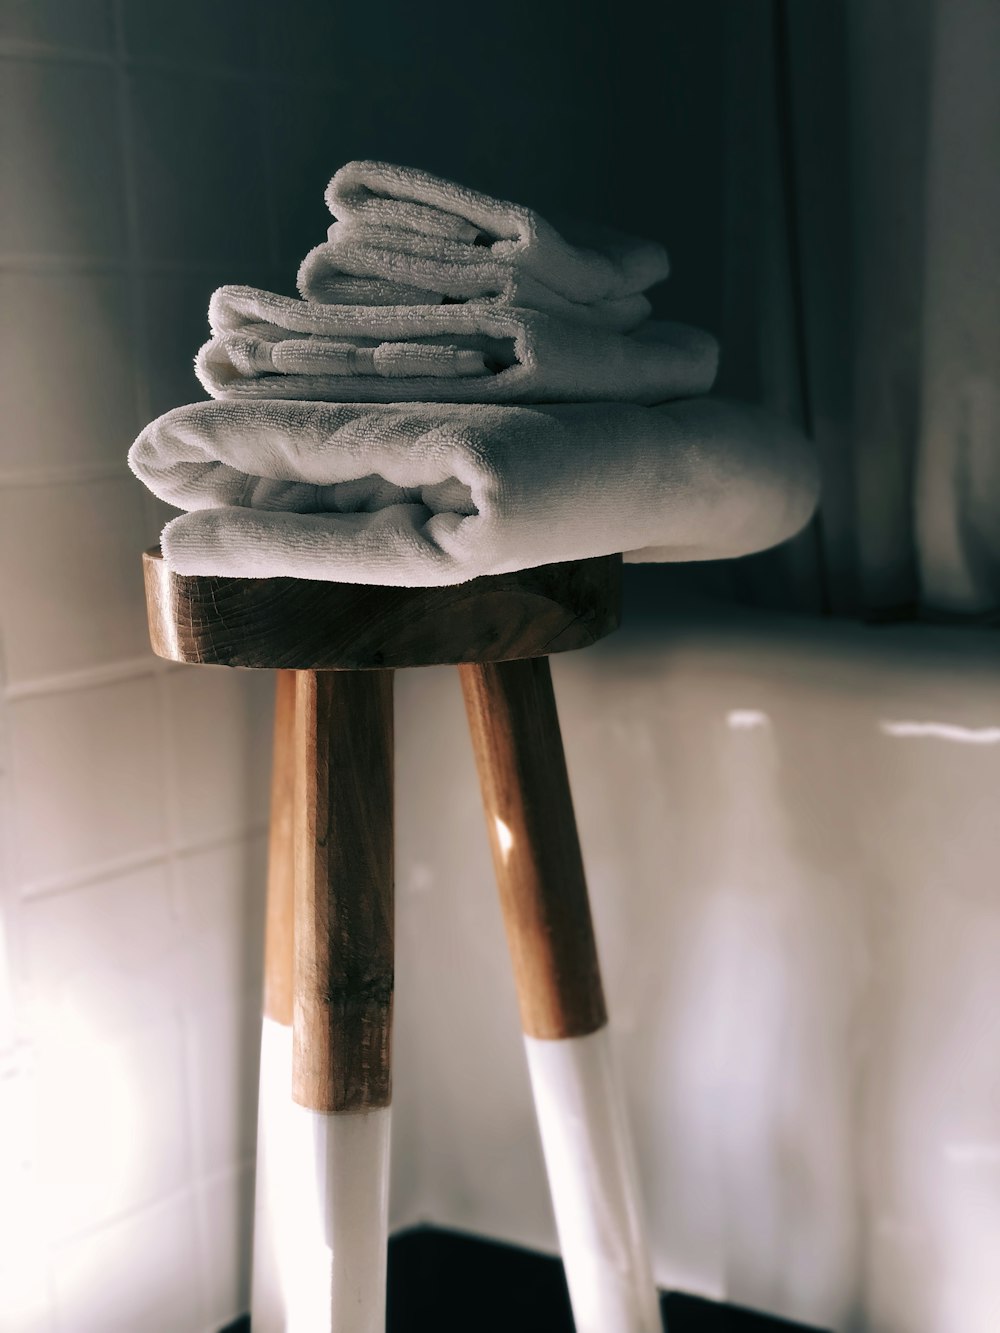 white towels on brown wooden stool